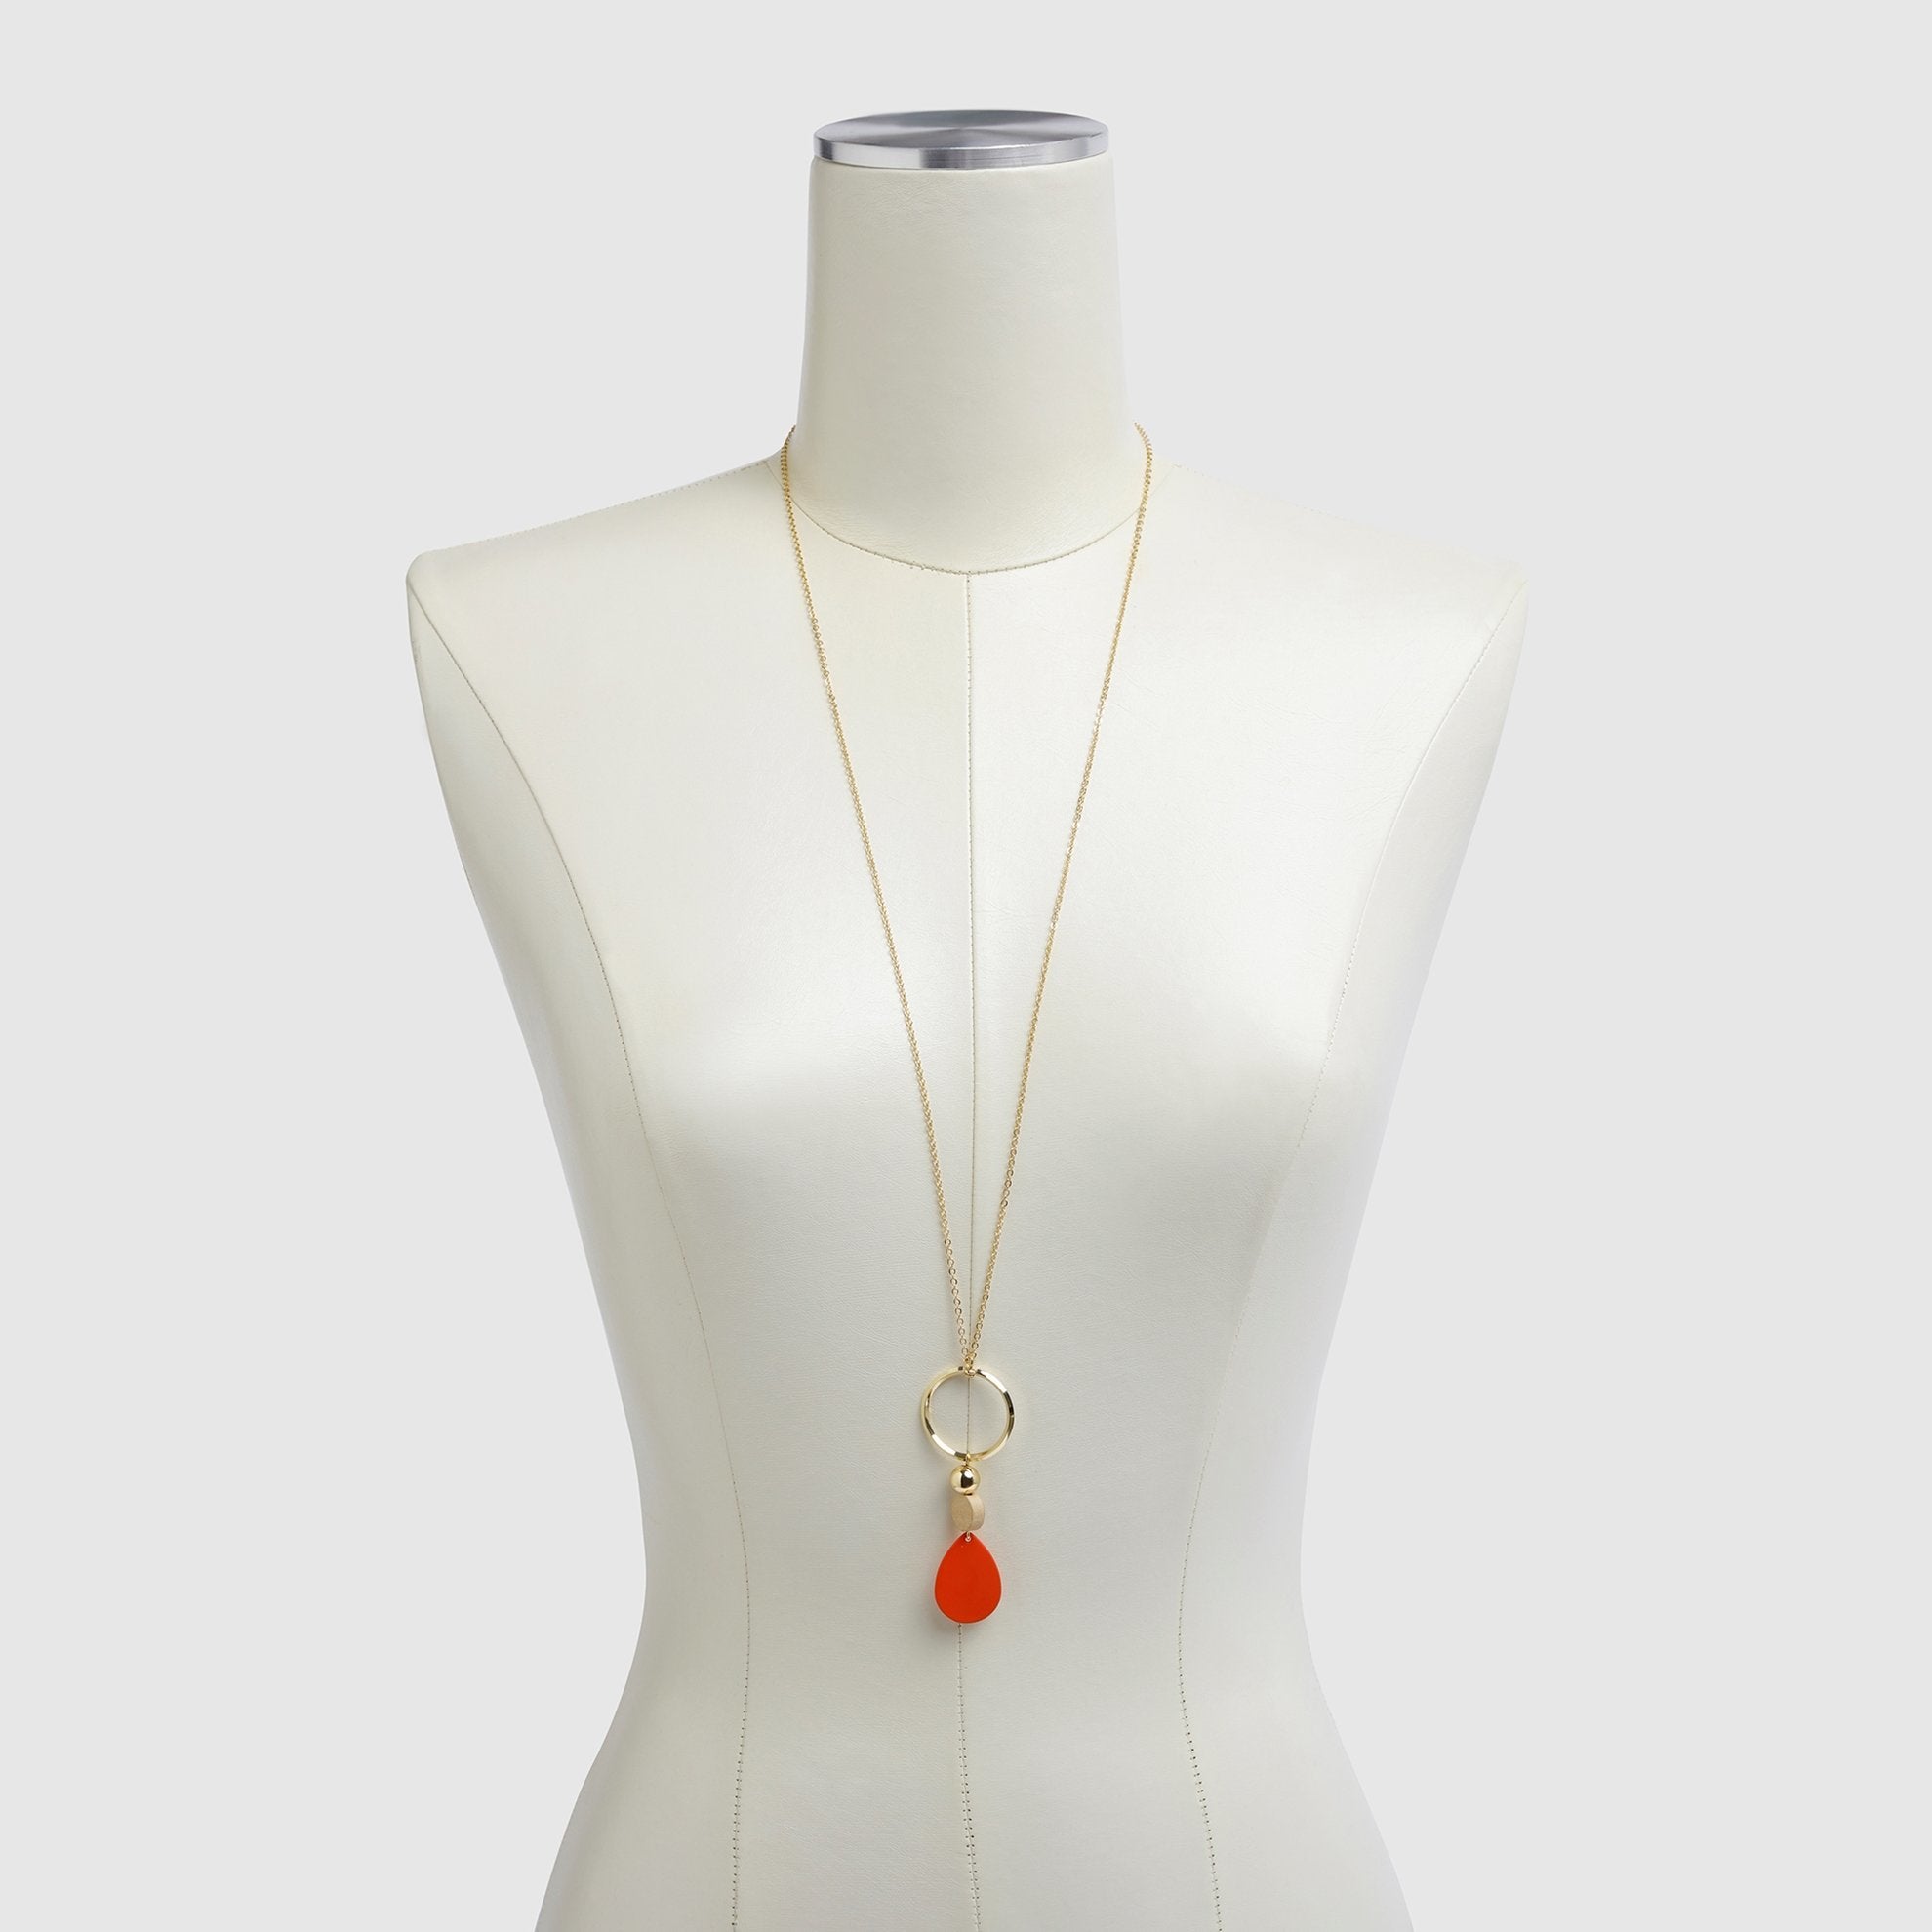 Red Drop Necklace on Dress Form